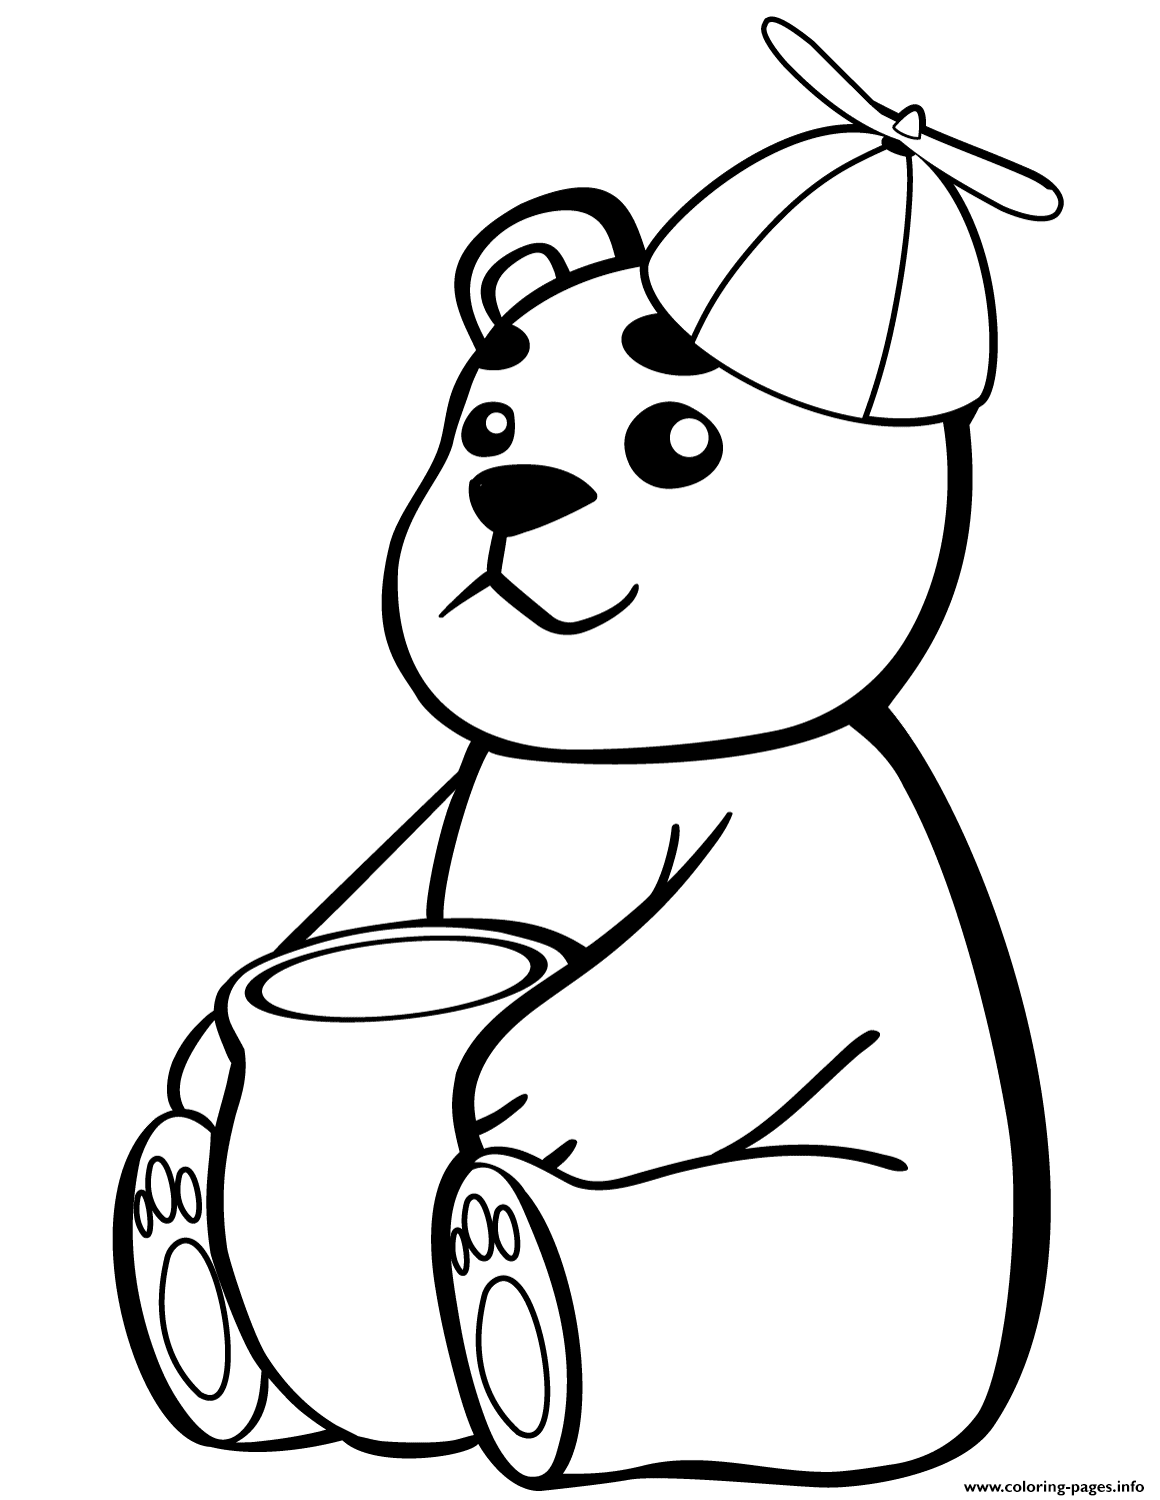 Baby Bear With Pot Of Honey coloring